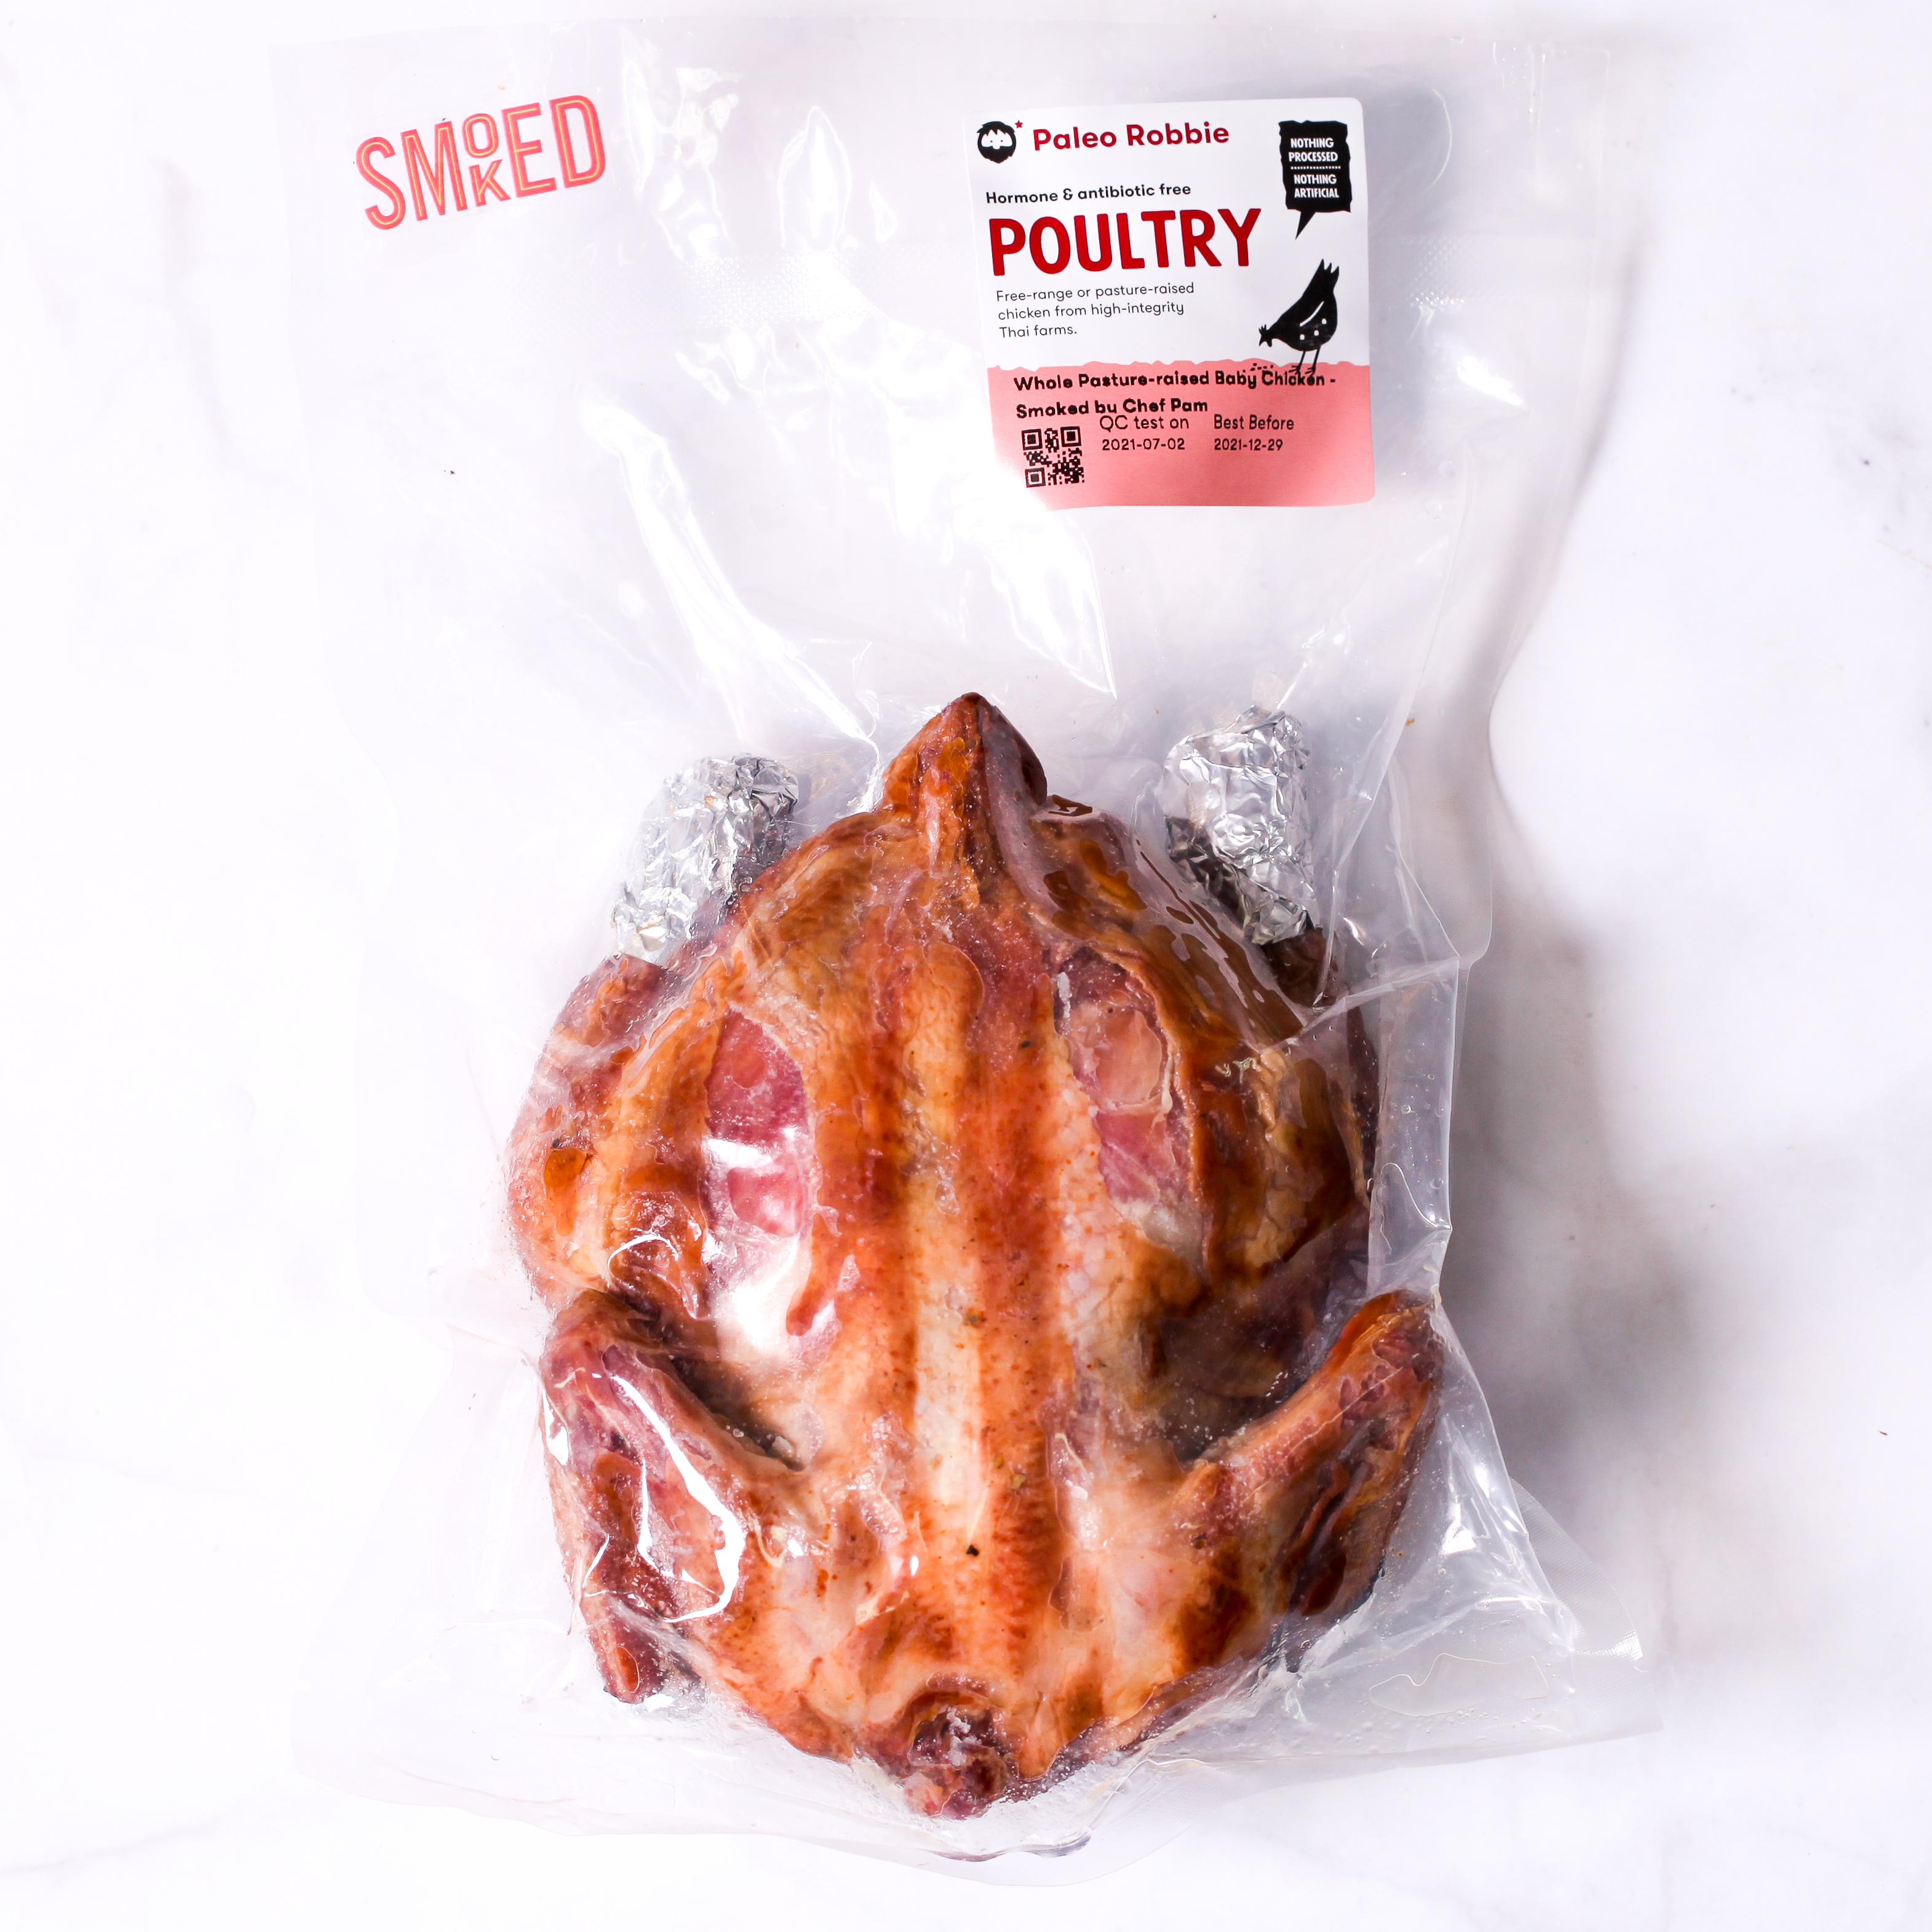 Whole Pasture-raised Baby Chicken - Smoked by Chef Pam